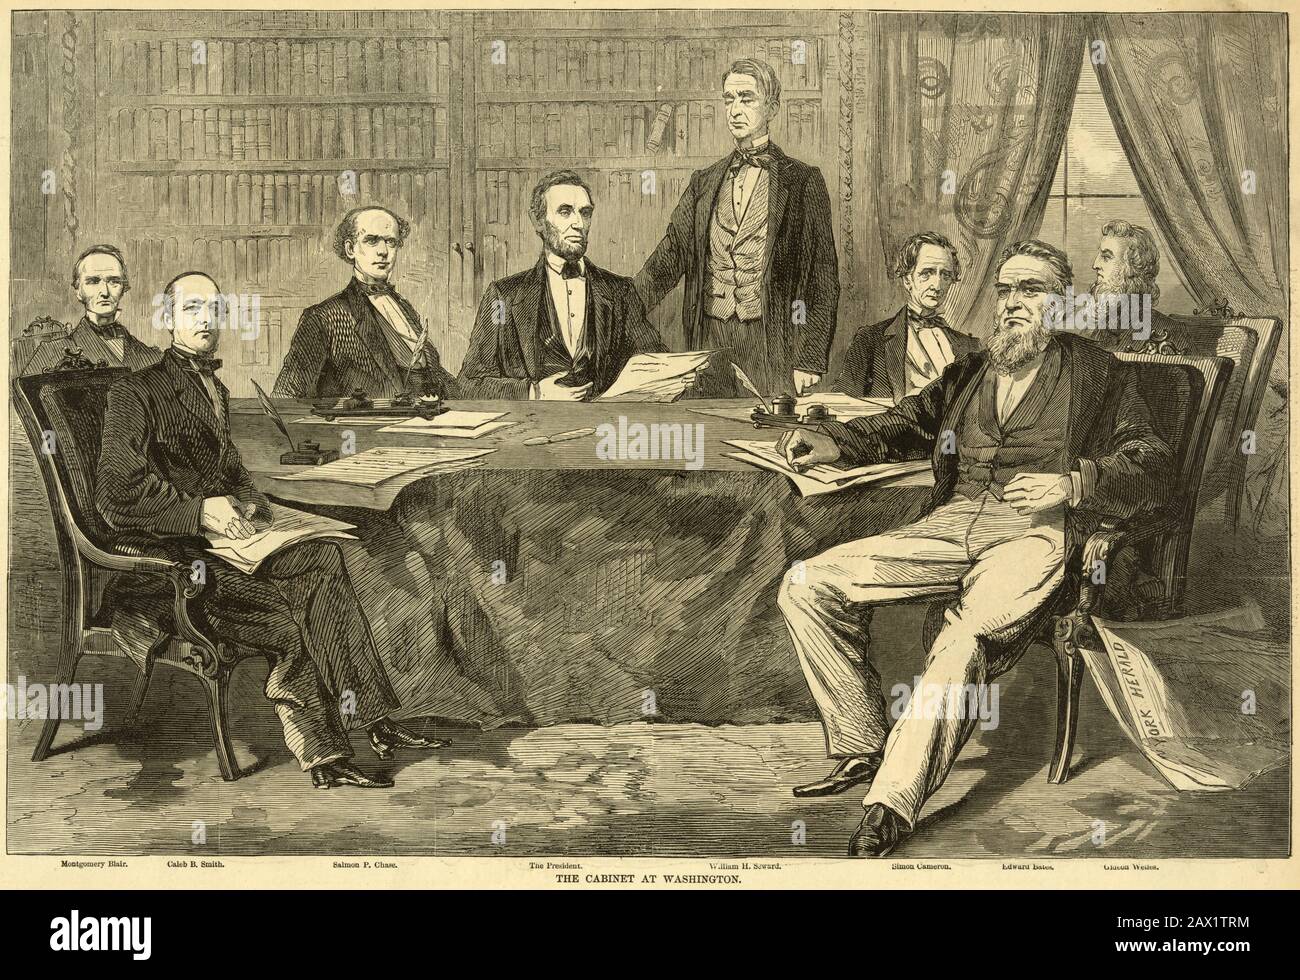 1861 , USA :  The cabinet at Washington. From 'HARPER'S WEEKLY'  13 july 1861 .  The U.S.A. President ABRAHAM LINCOLN ( 1809 - 1865 ) . Print showing Abraham Lincoln President , signing the CONSTITUTION OF THE UNITED STATES OF AMERICA  . Print showing Lincoln with Montgomery BLAIR ( 1813 - 1883 ), Caleb B. (Caleb Blood) SMITH (1808 - 1864), Chase, Salmon P.--(Salmon Portland) CHASE (1808 - 1873 ), William Henry SEWARD (1801 - 1872 ), Simon CAMERON ( 1799 - 1889 ), Bates, Edward BATES (1793 - 1869 ), Gideon WELLES ( 1802 - 1878 )  -  Presidente della Repubblica - Stati Uniti -  USA - ritratto - Stock Photo